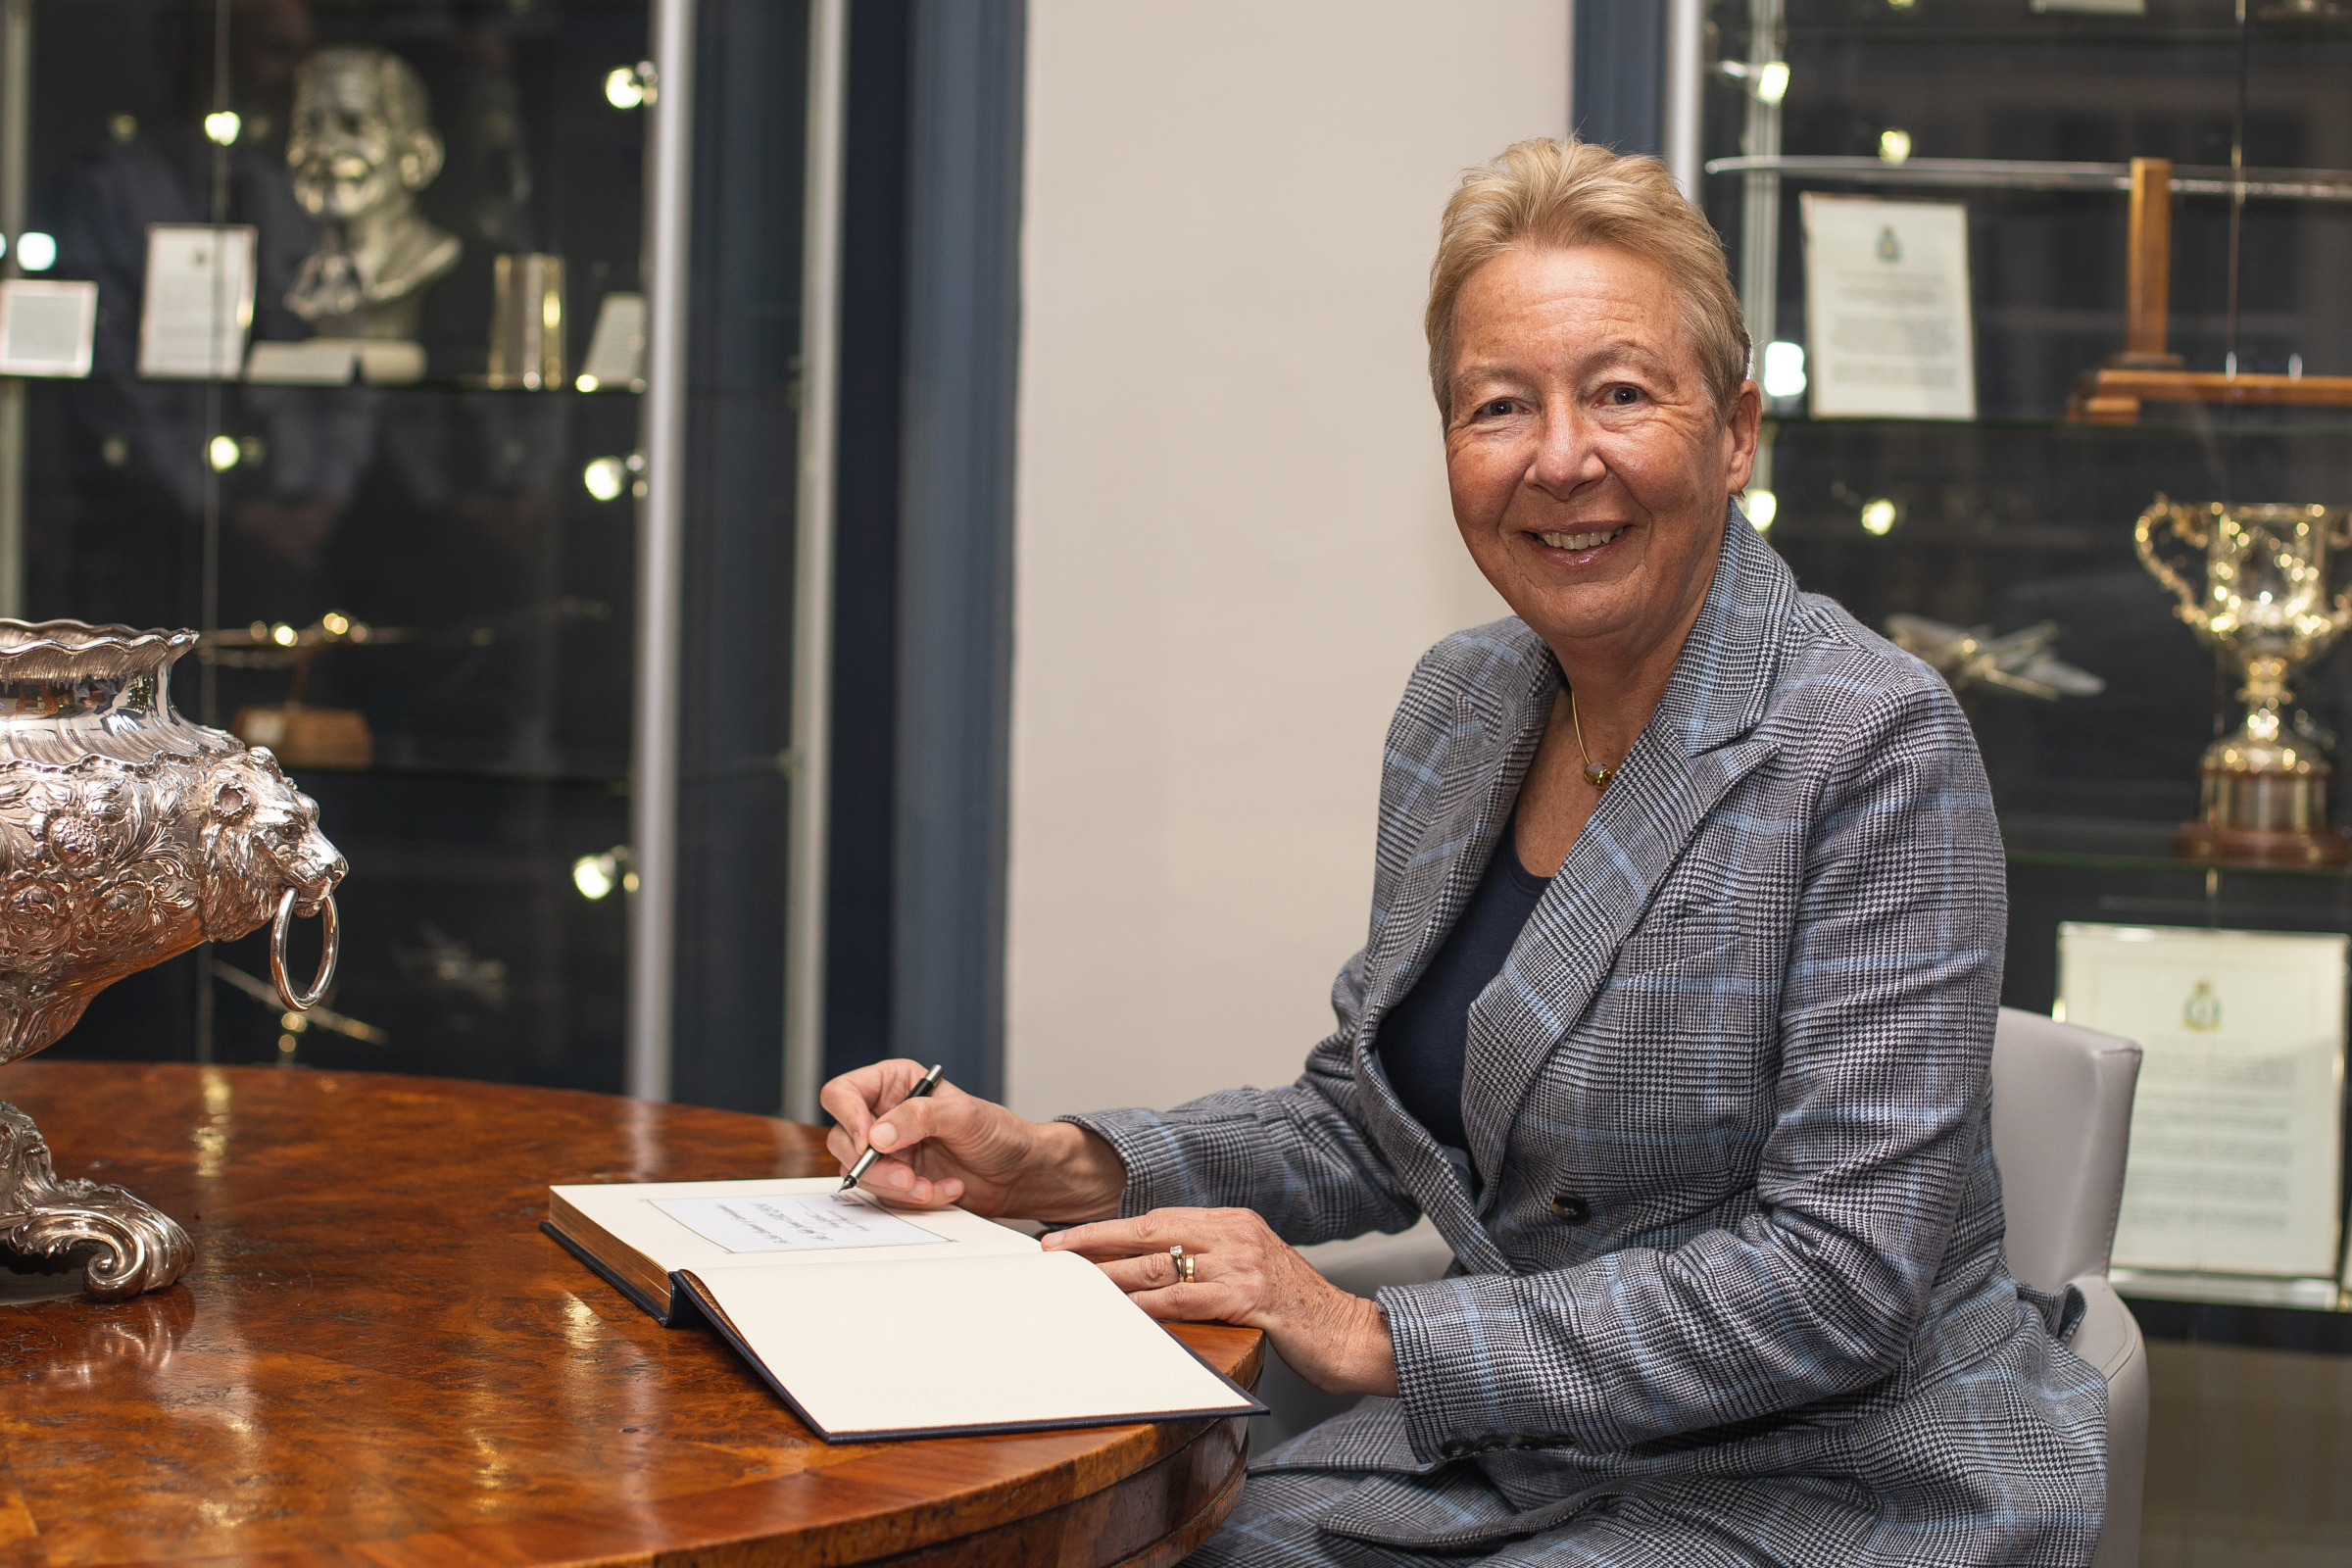 Mrs Spence signs the visitors’ book at RAF Wittering